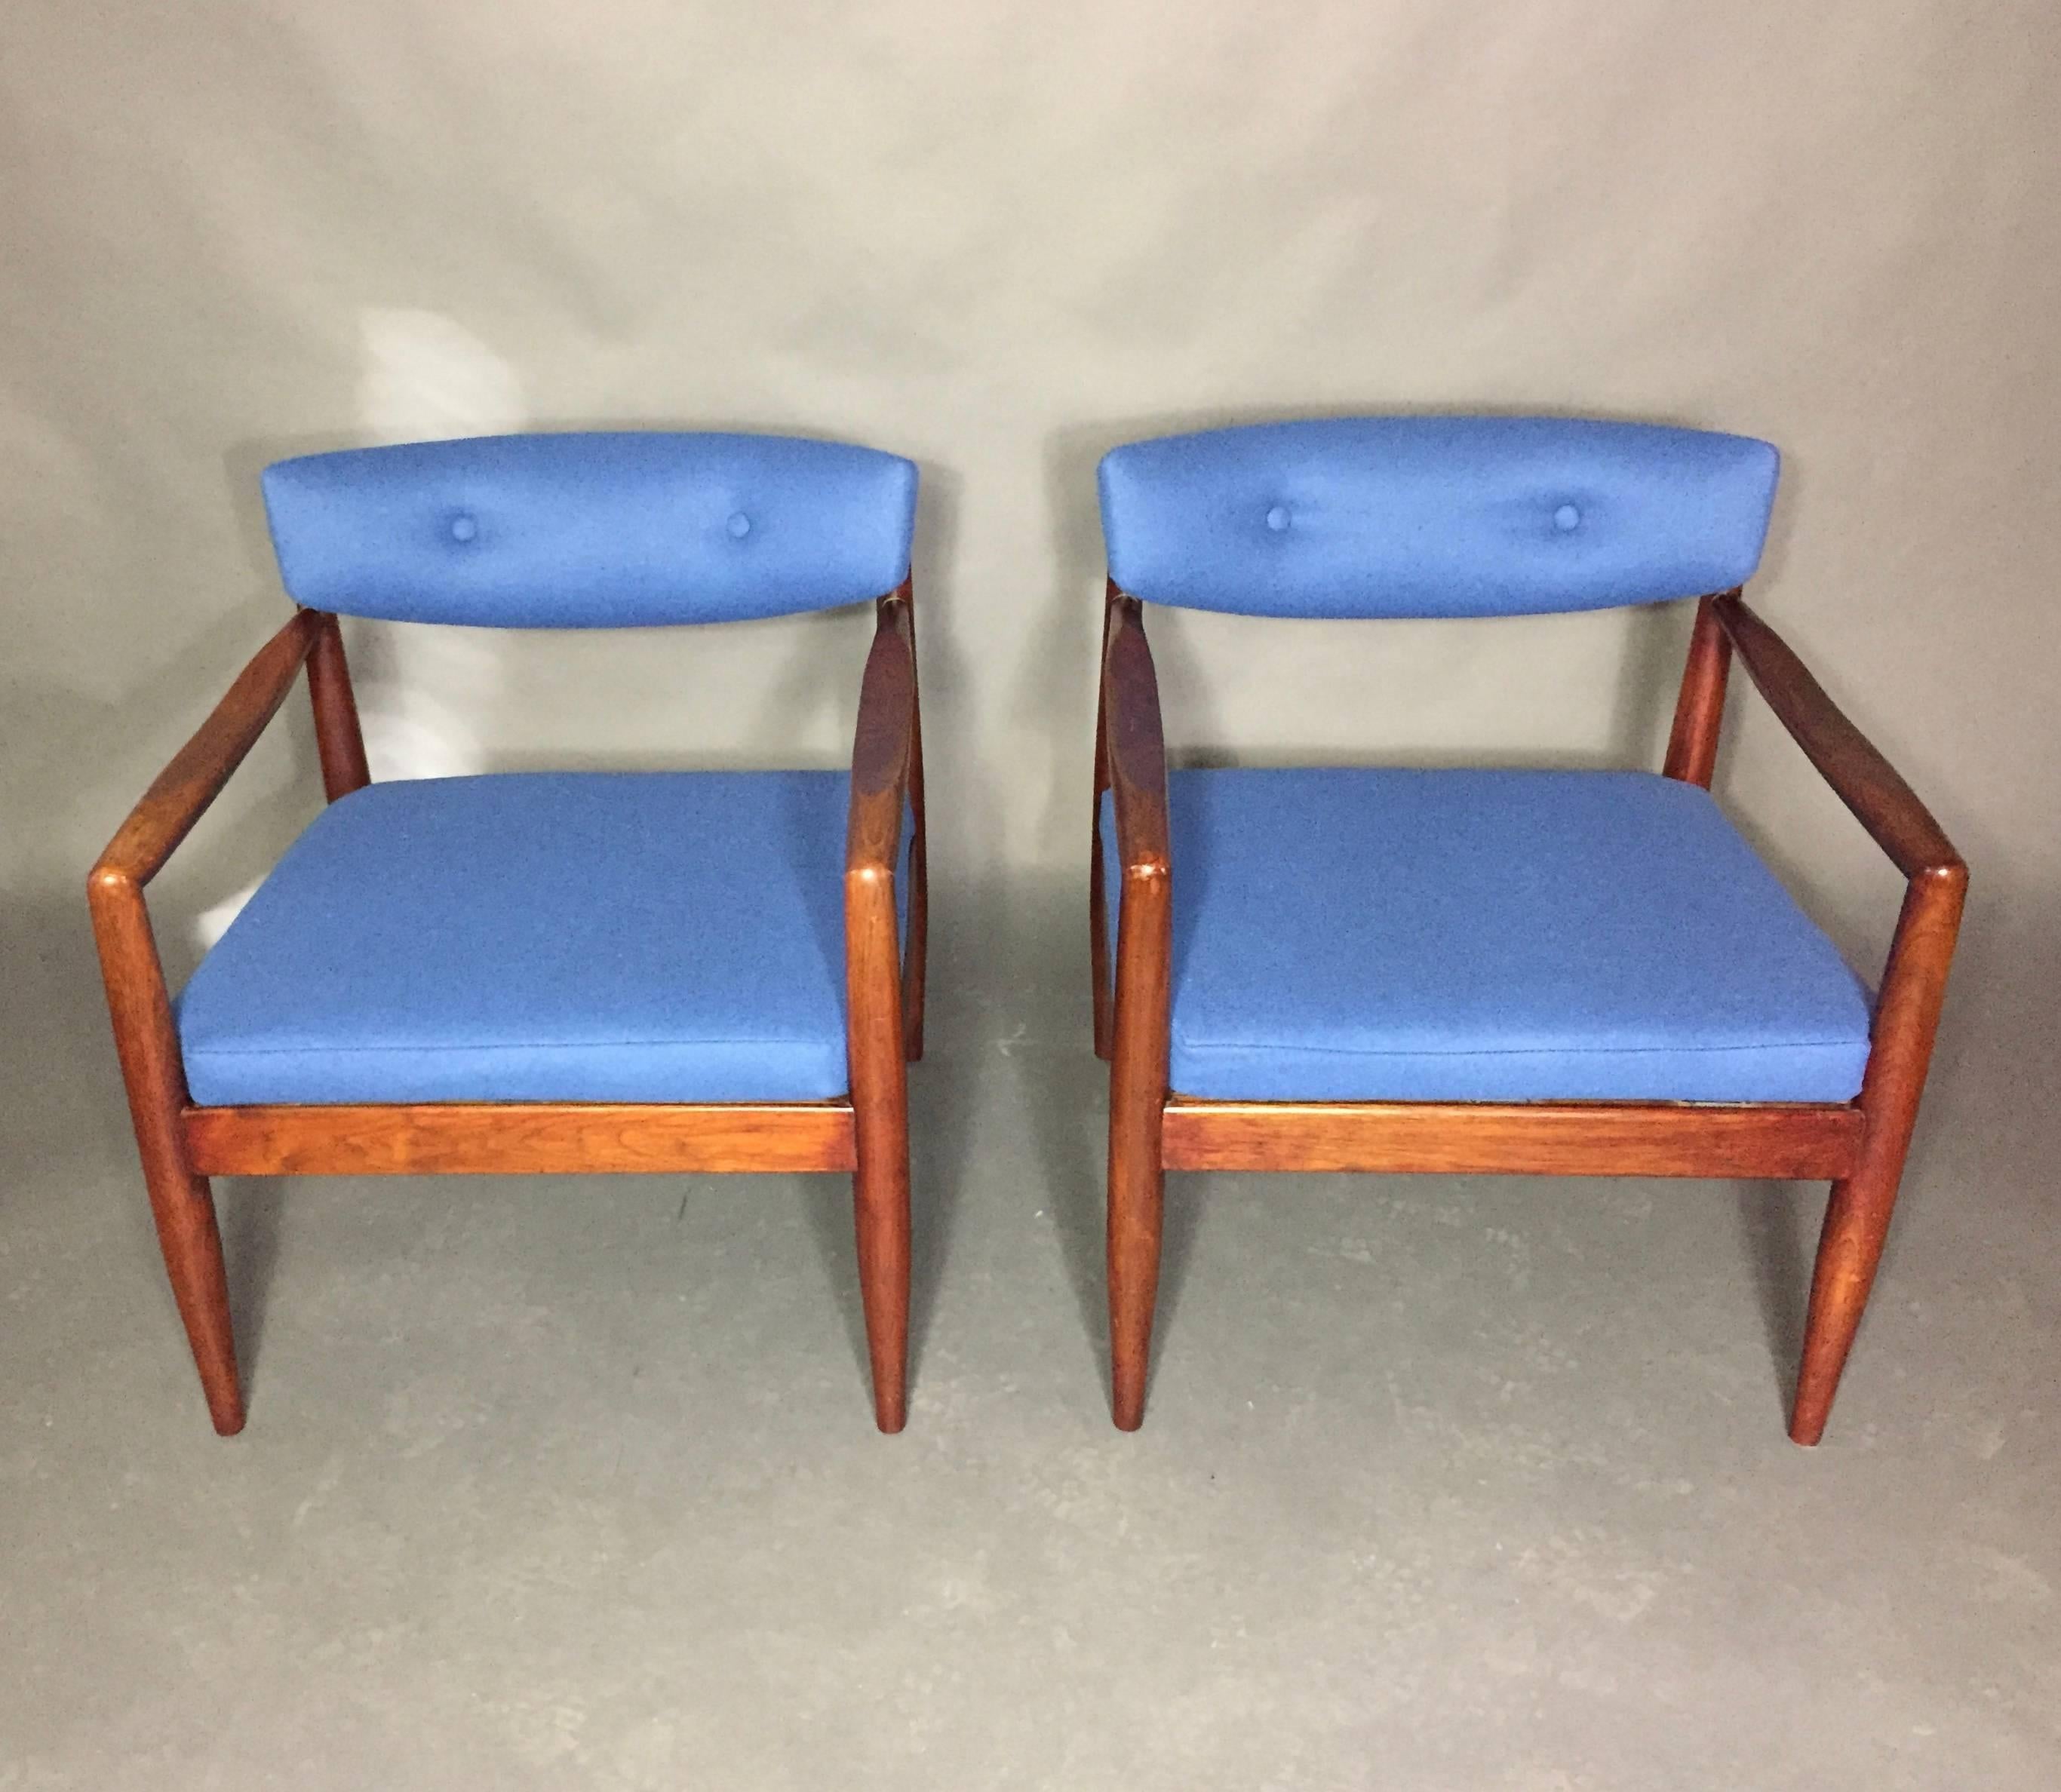 This pair was originally designed with an overstuffed seat cushion a bit extreme of the Pearsall lounge chairs. We shortened the seat to enhance the beauty of the chair with a shallow buttoned seat back that is slighted curved. Walnut frame with